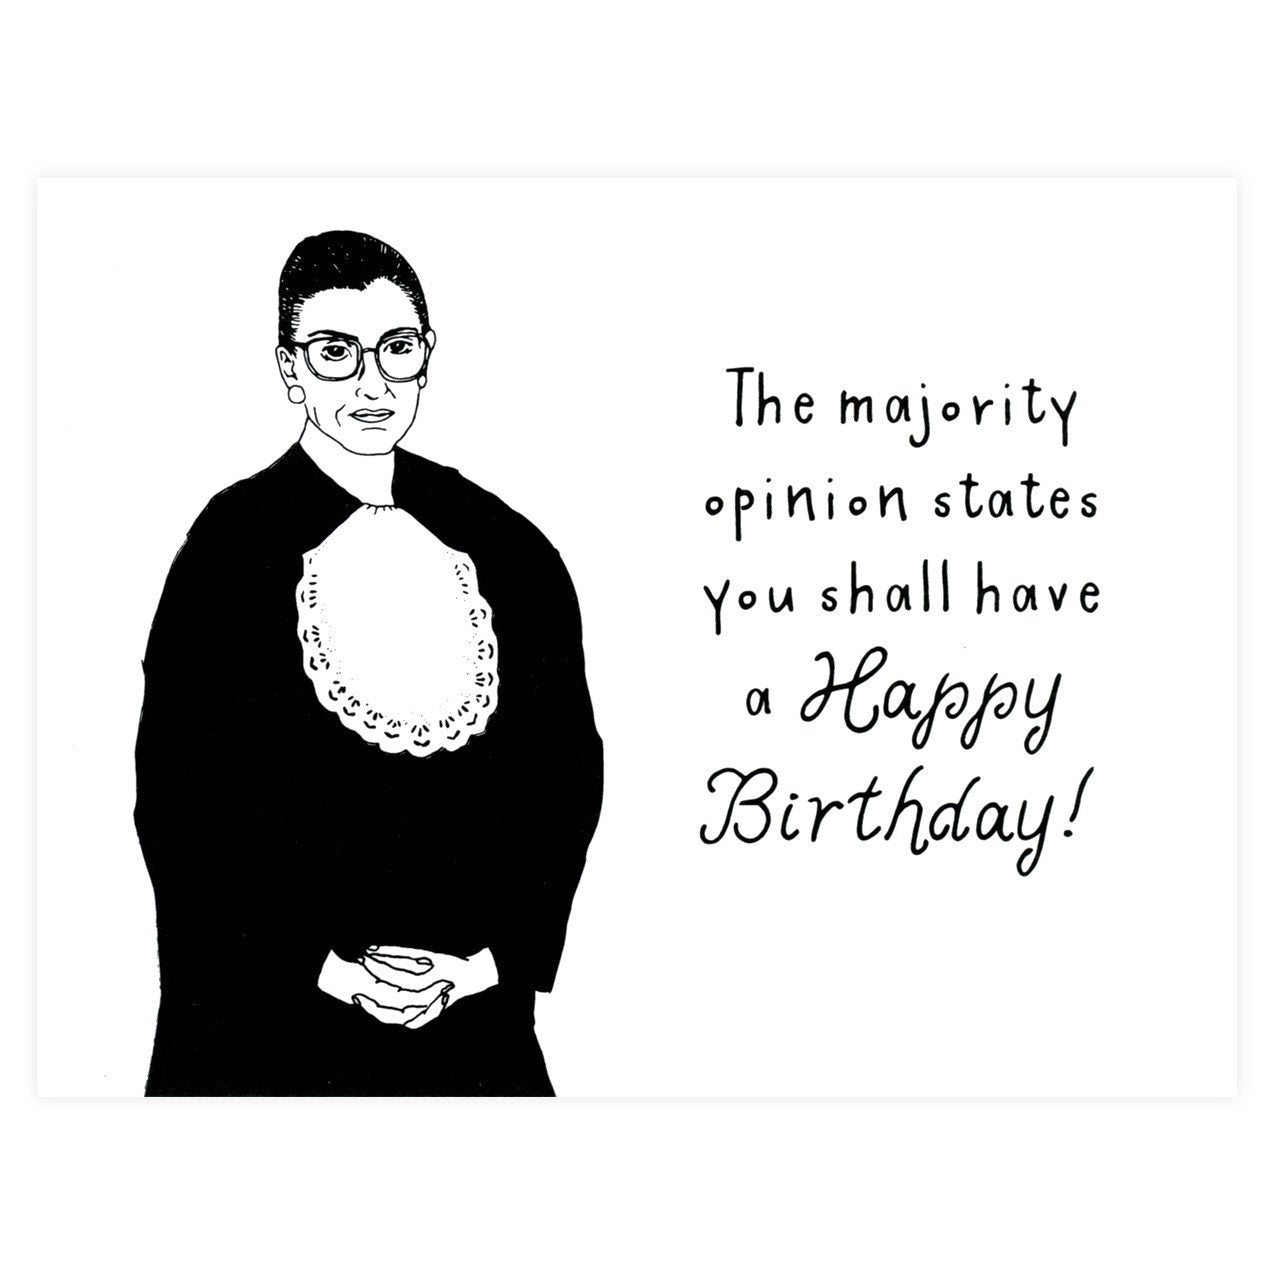 Party Of One Paper Ruth Bader Ginsburg Birthday Card 